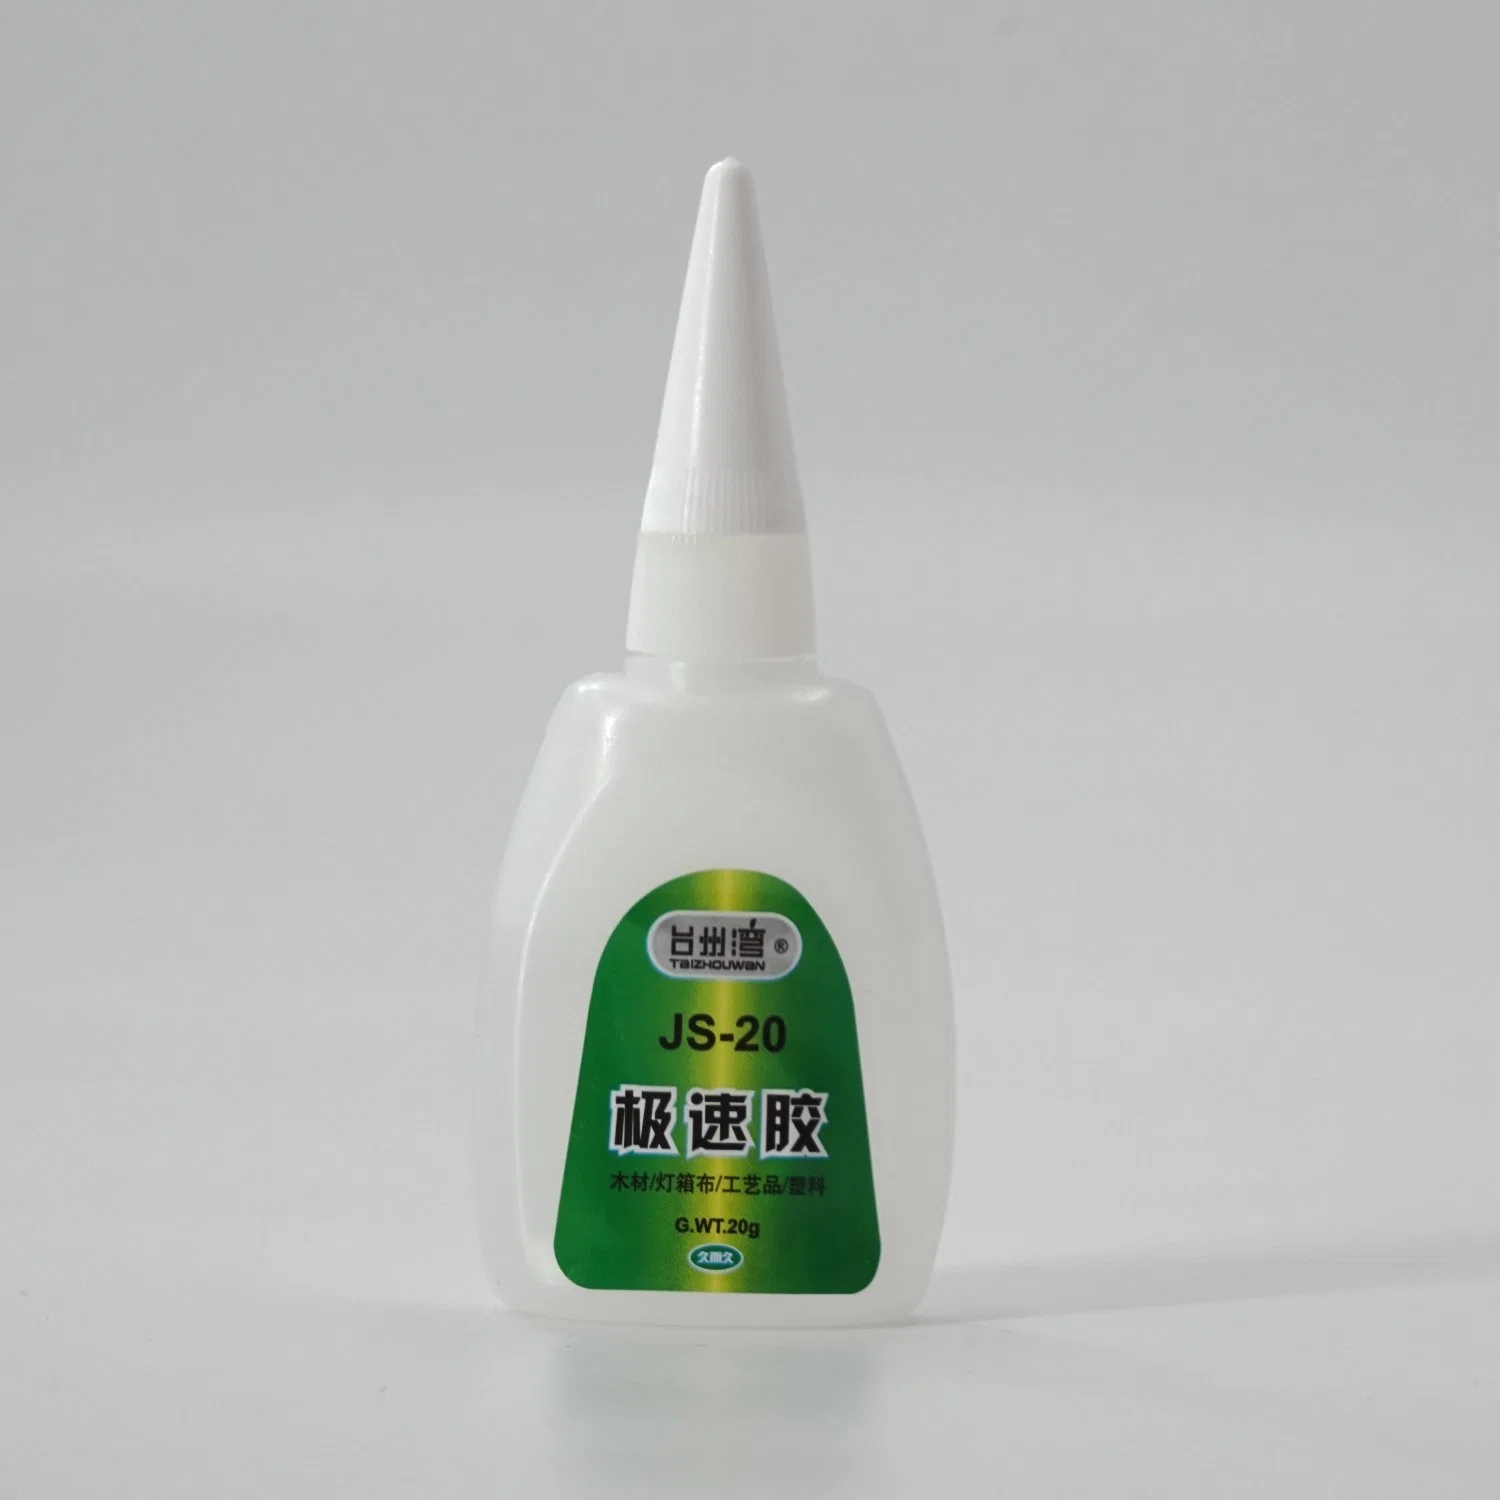 Super Glue Adhesive Glue Rubber Recommended Suppliers & Wholesalers